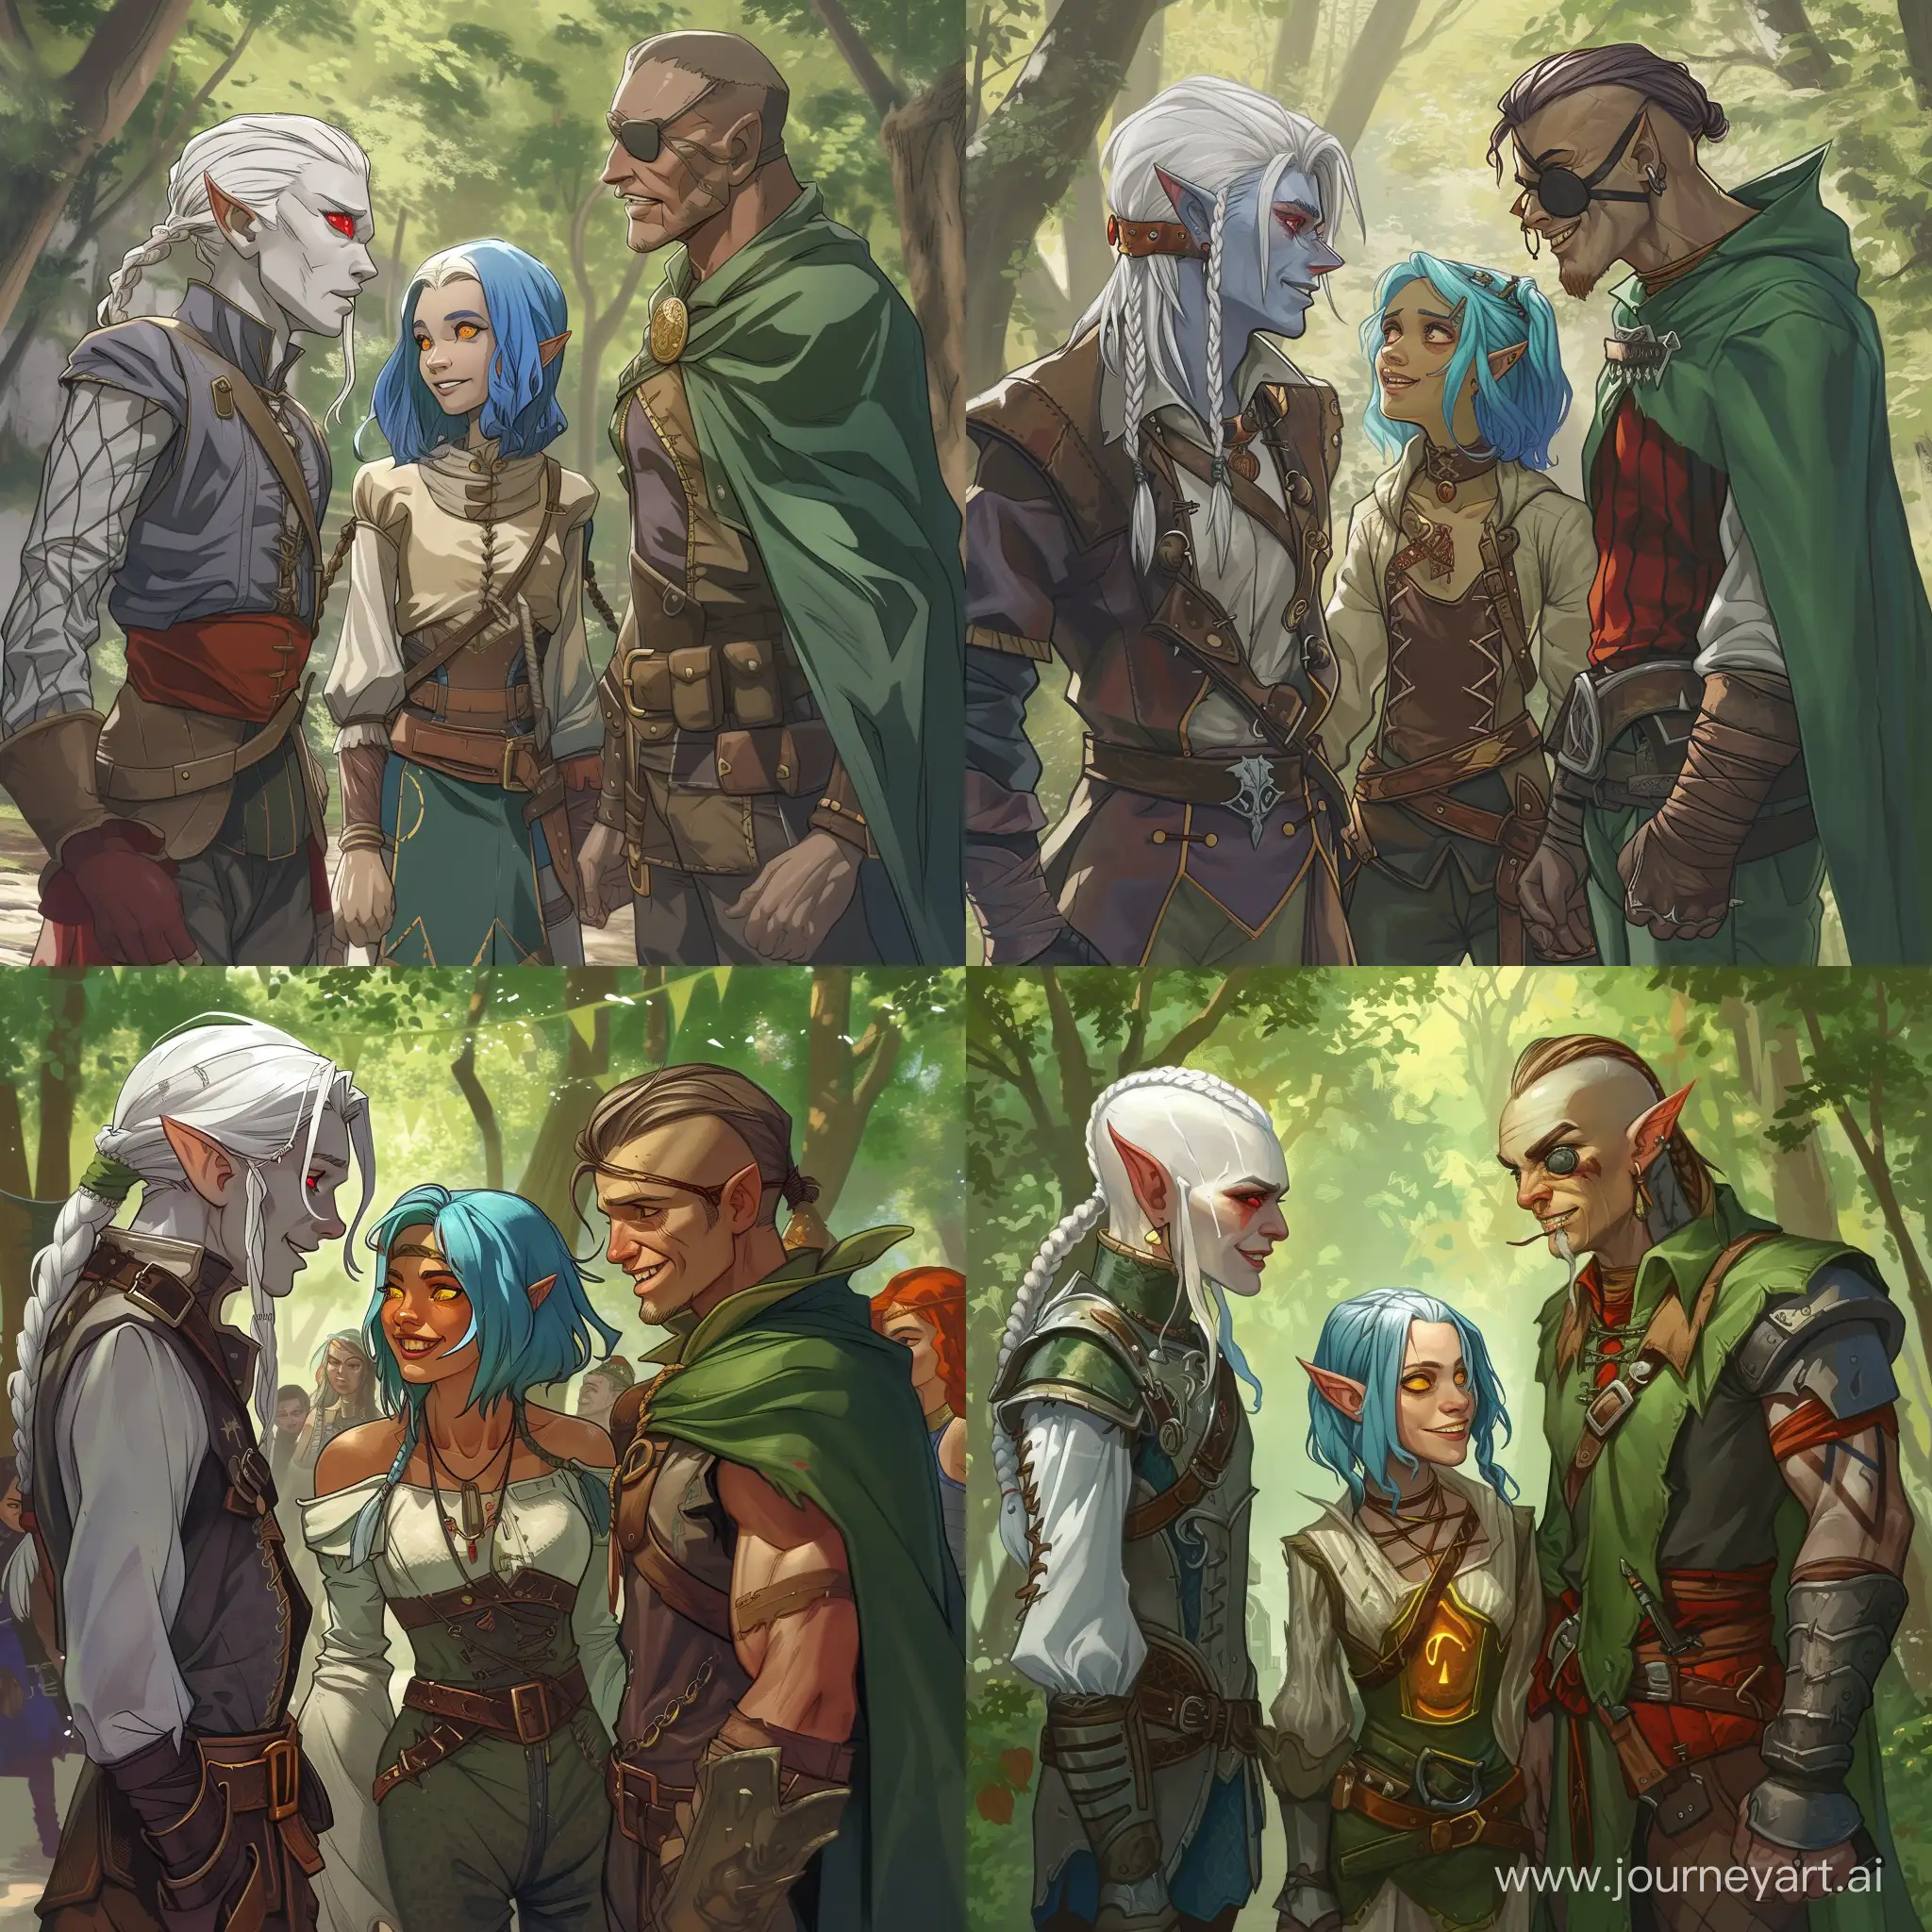 Dynamic-Encounter-Drow-Swashbuckler-HalfElf-Ranger-and-Barbarian-Banter-in-Forest-Clearing